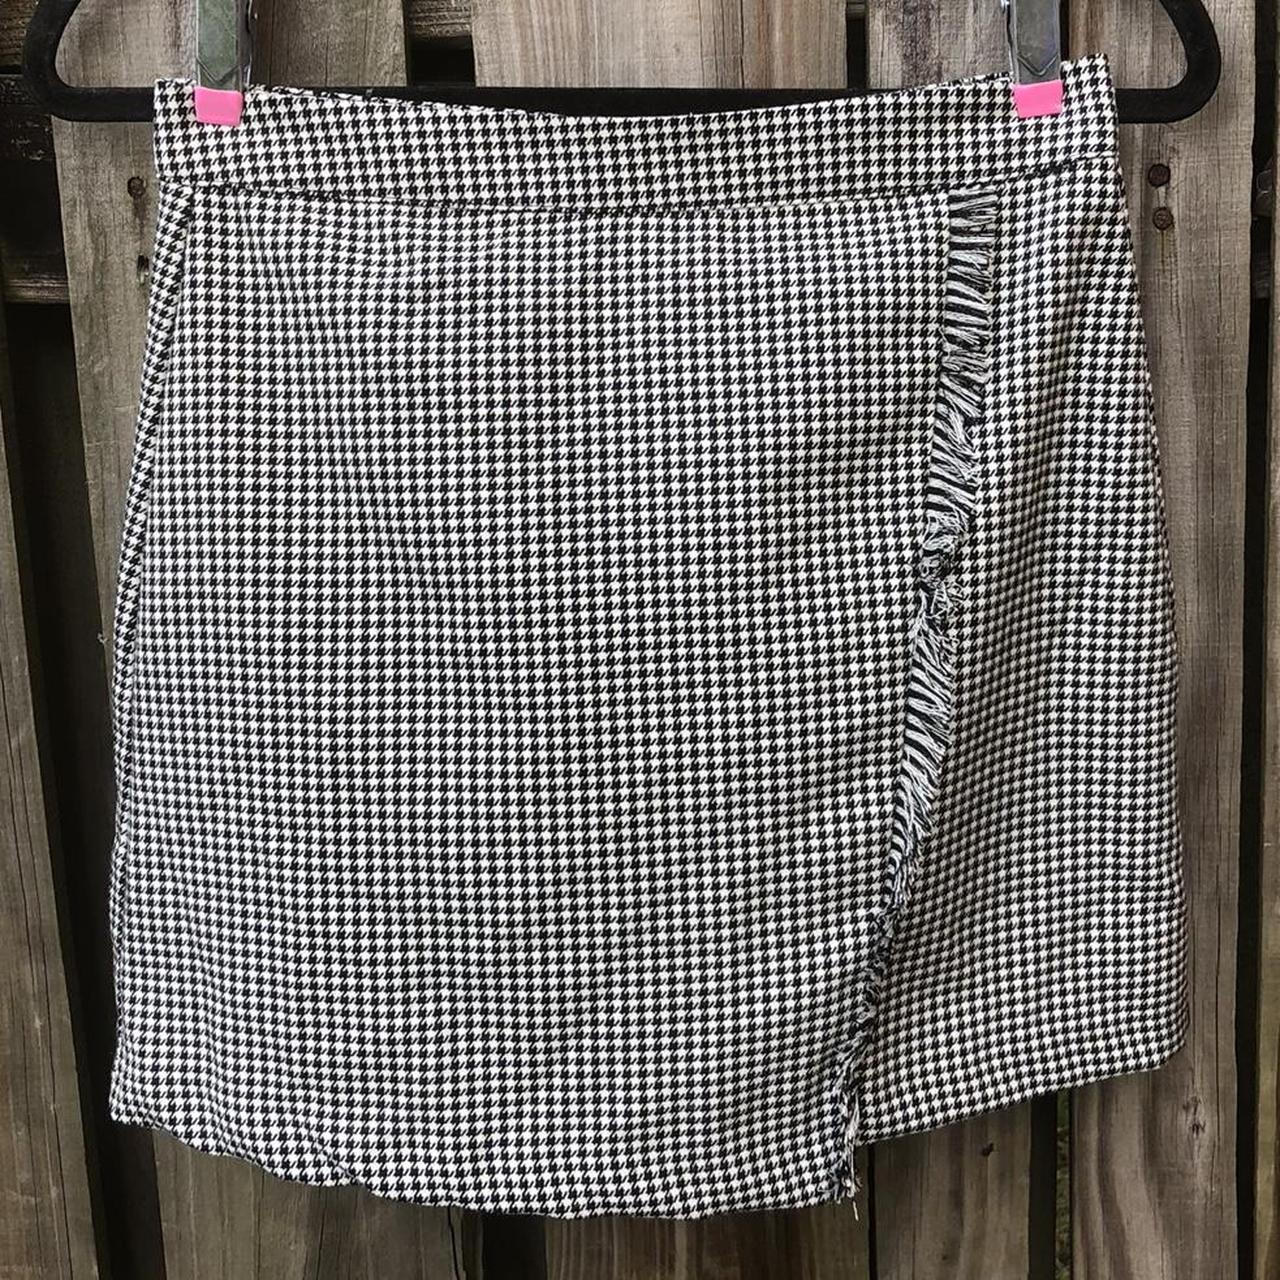 Product Image 2 - Asymmetrical houndstooth skirt with frayed